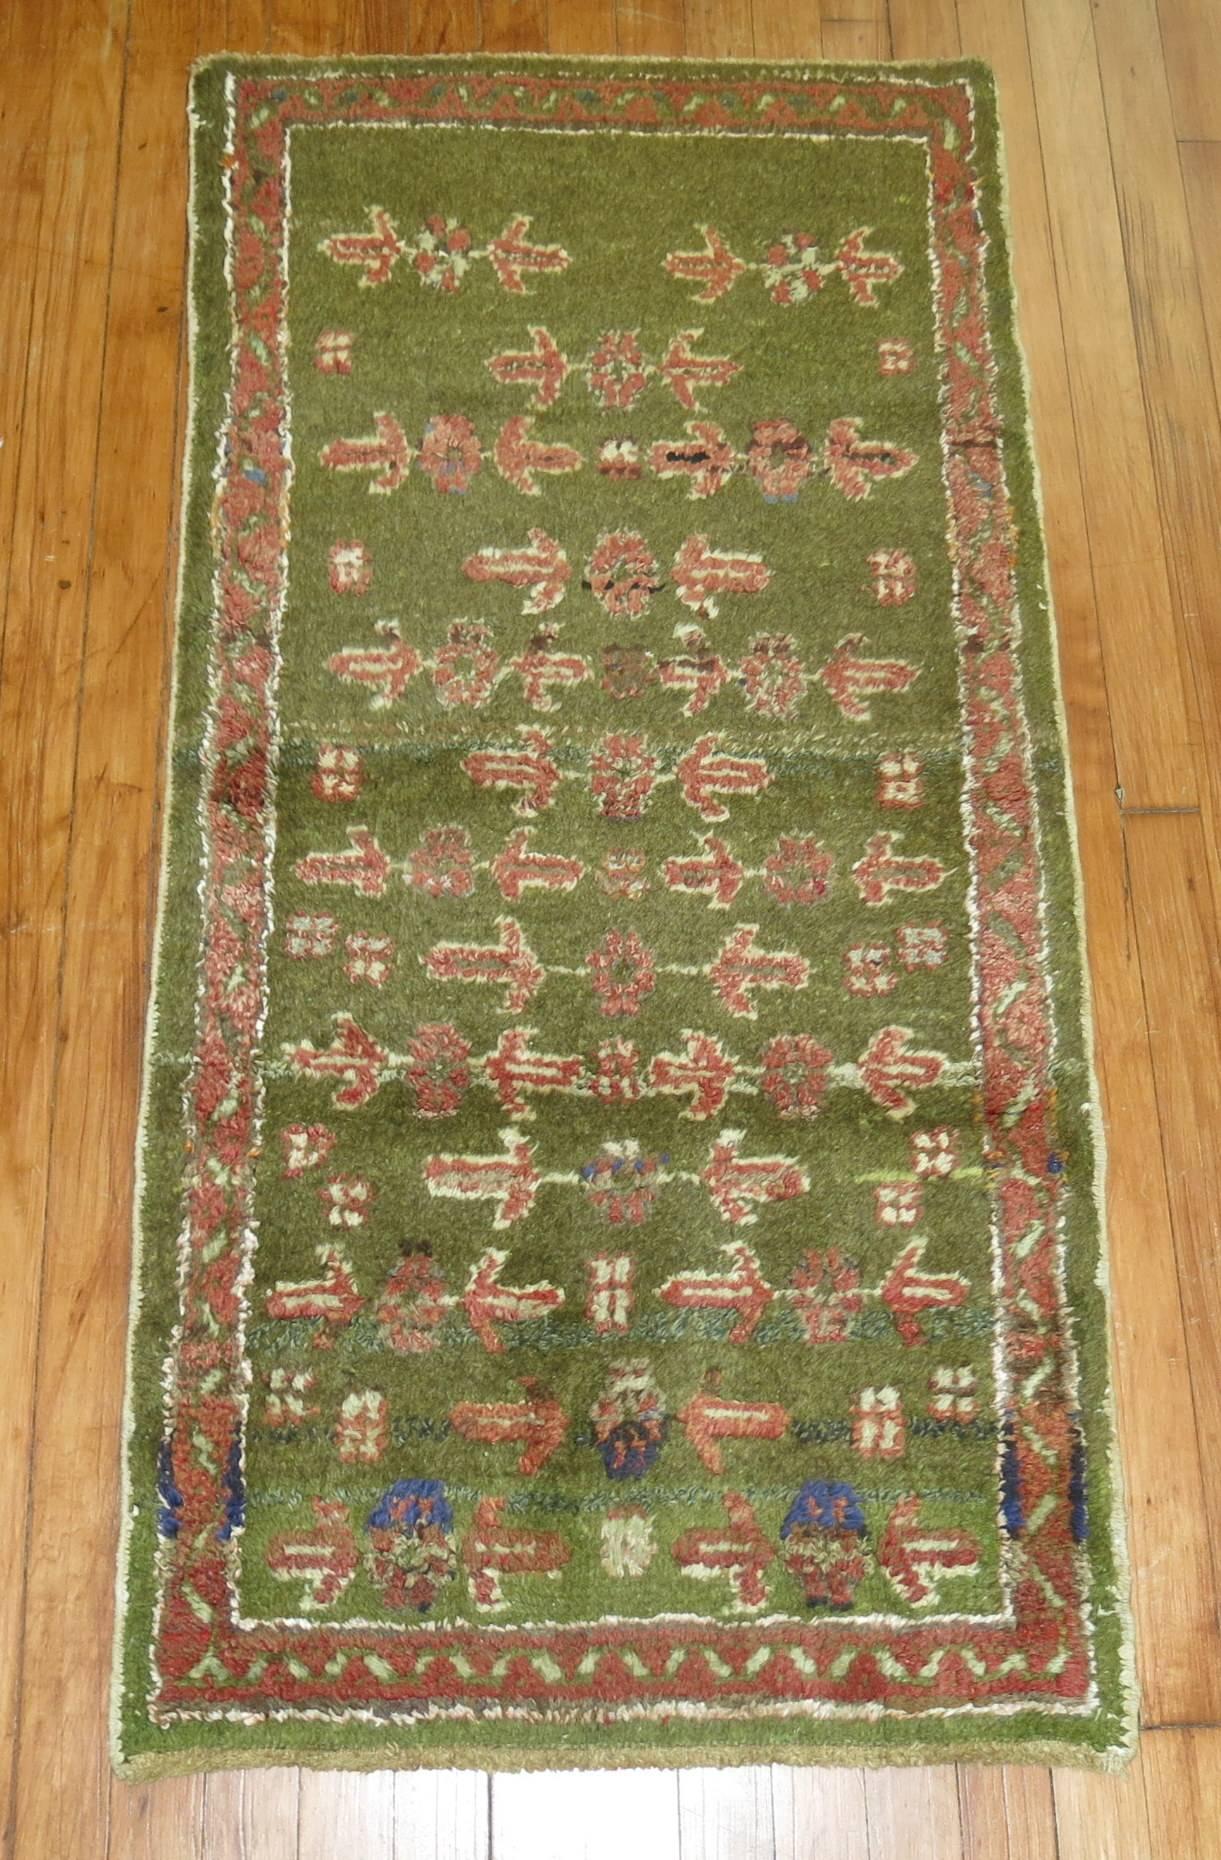 Small vintage Turkish Oushak rug in a rare army green color,

circa 1930. Measures: 2'2